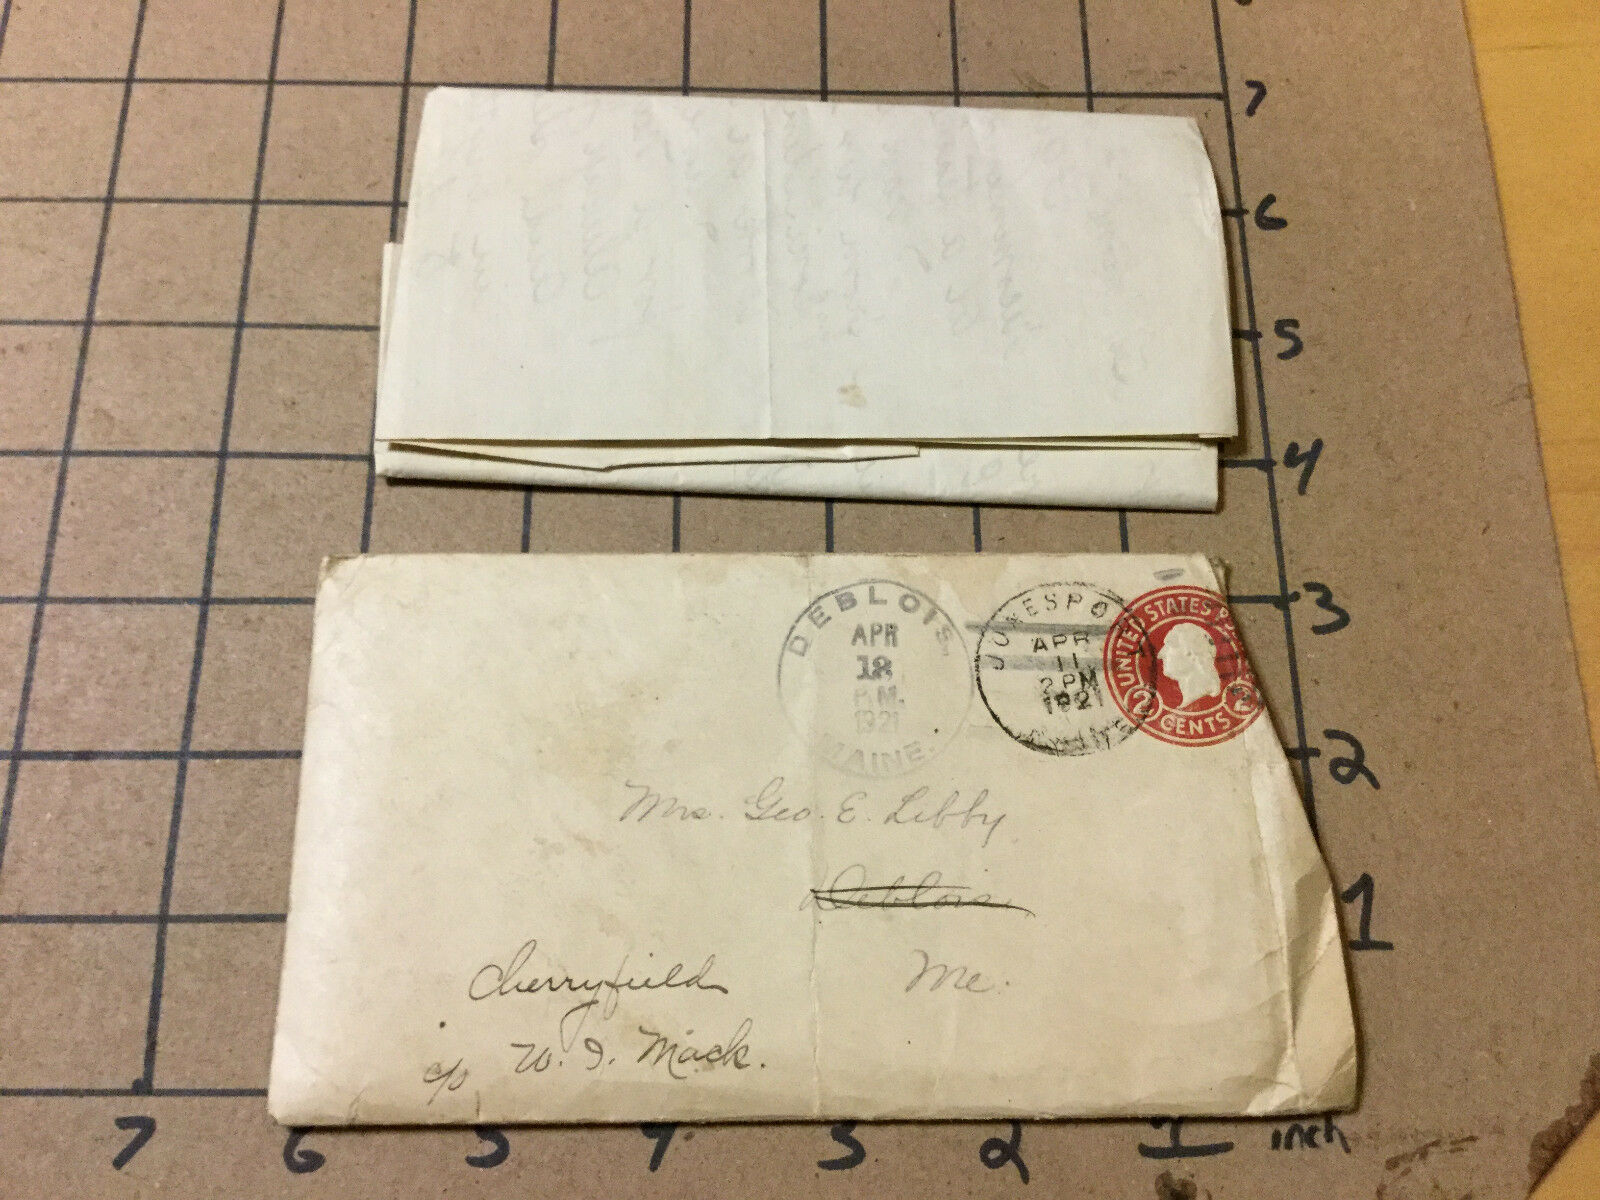 Original Vintage Letters: 1921 About Jobs In Maine - Columbia Falls, Etc